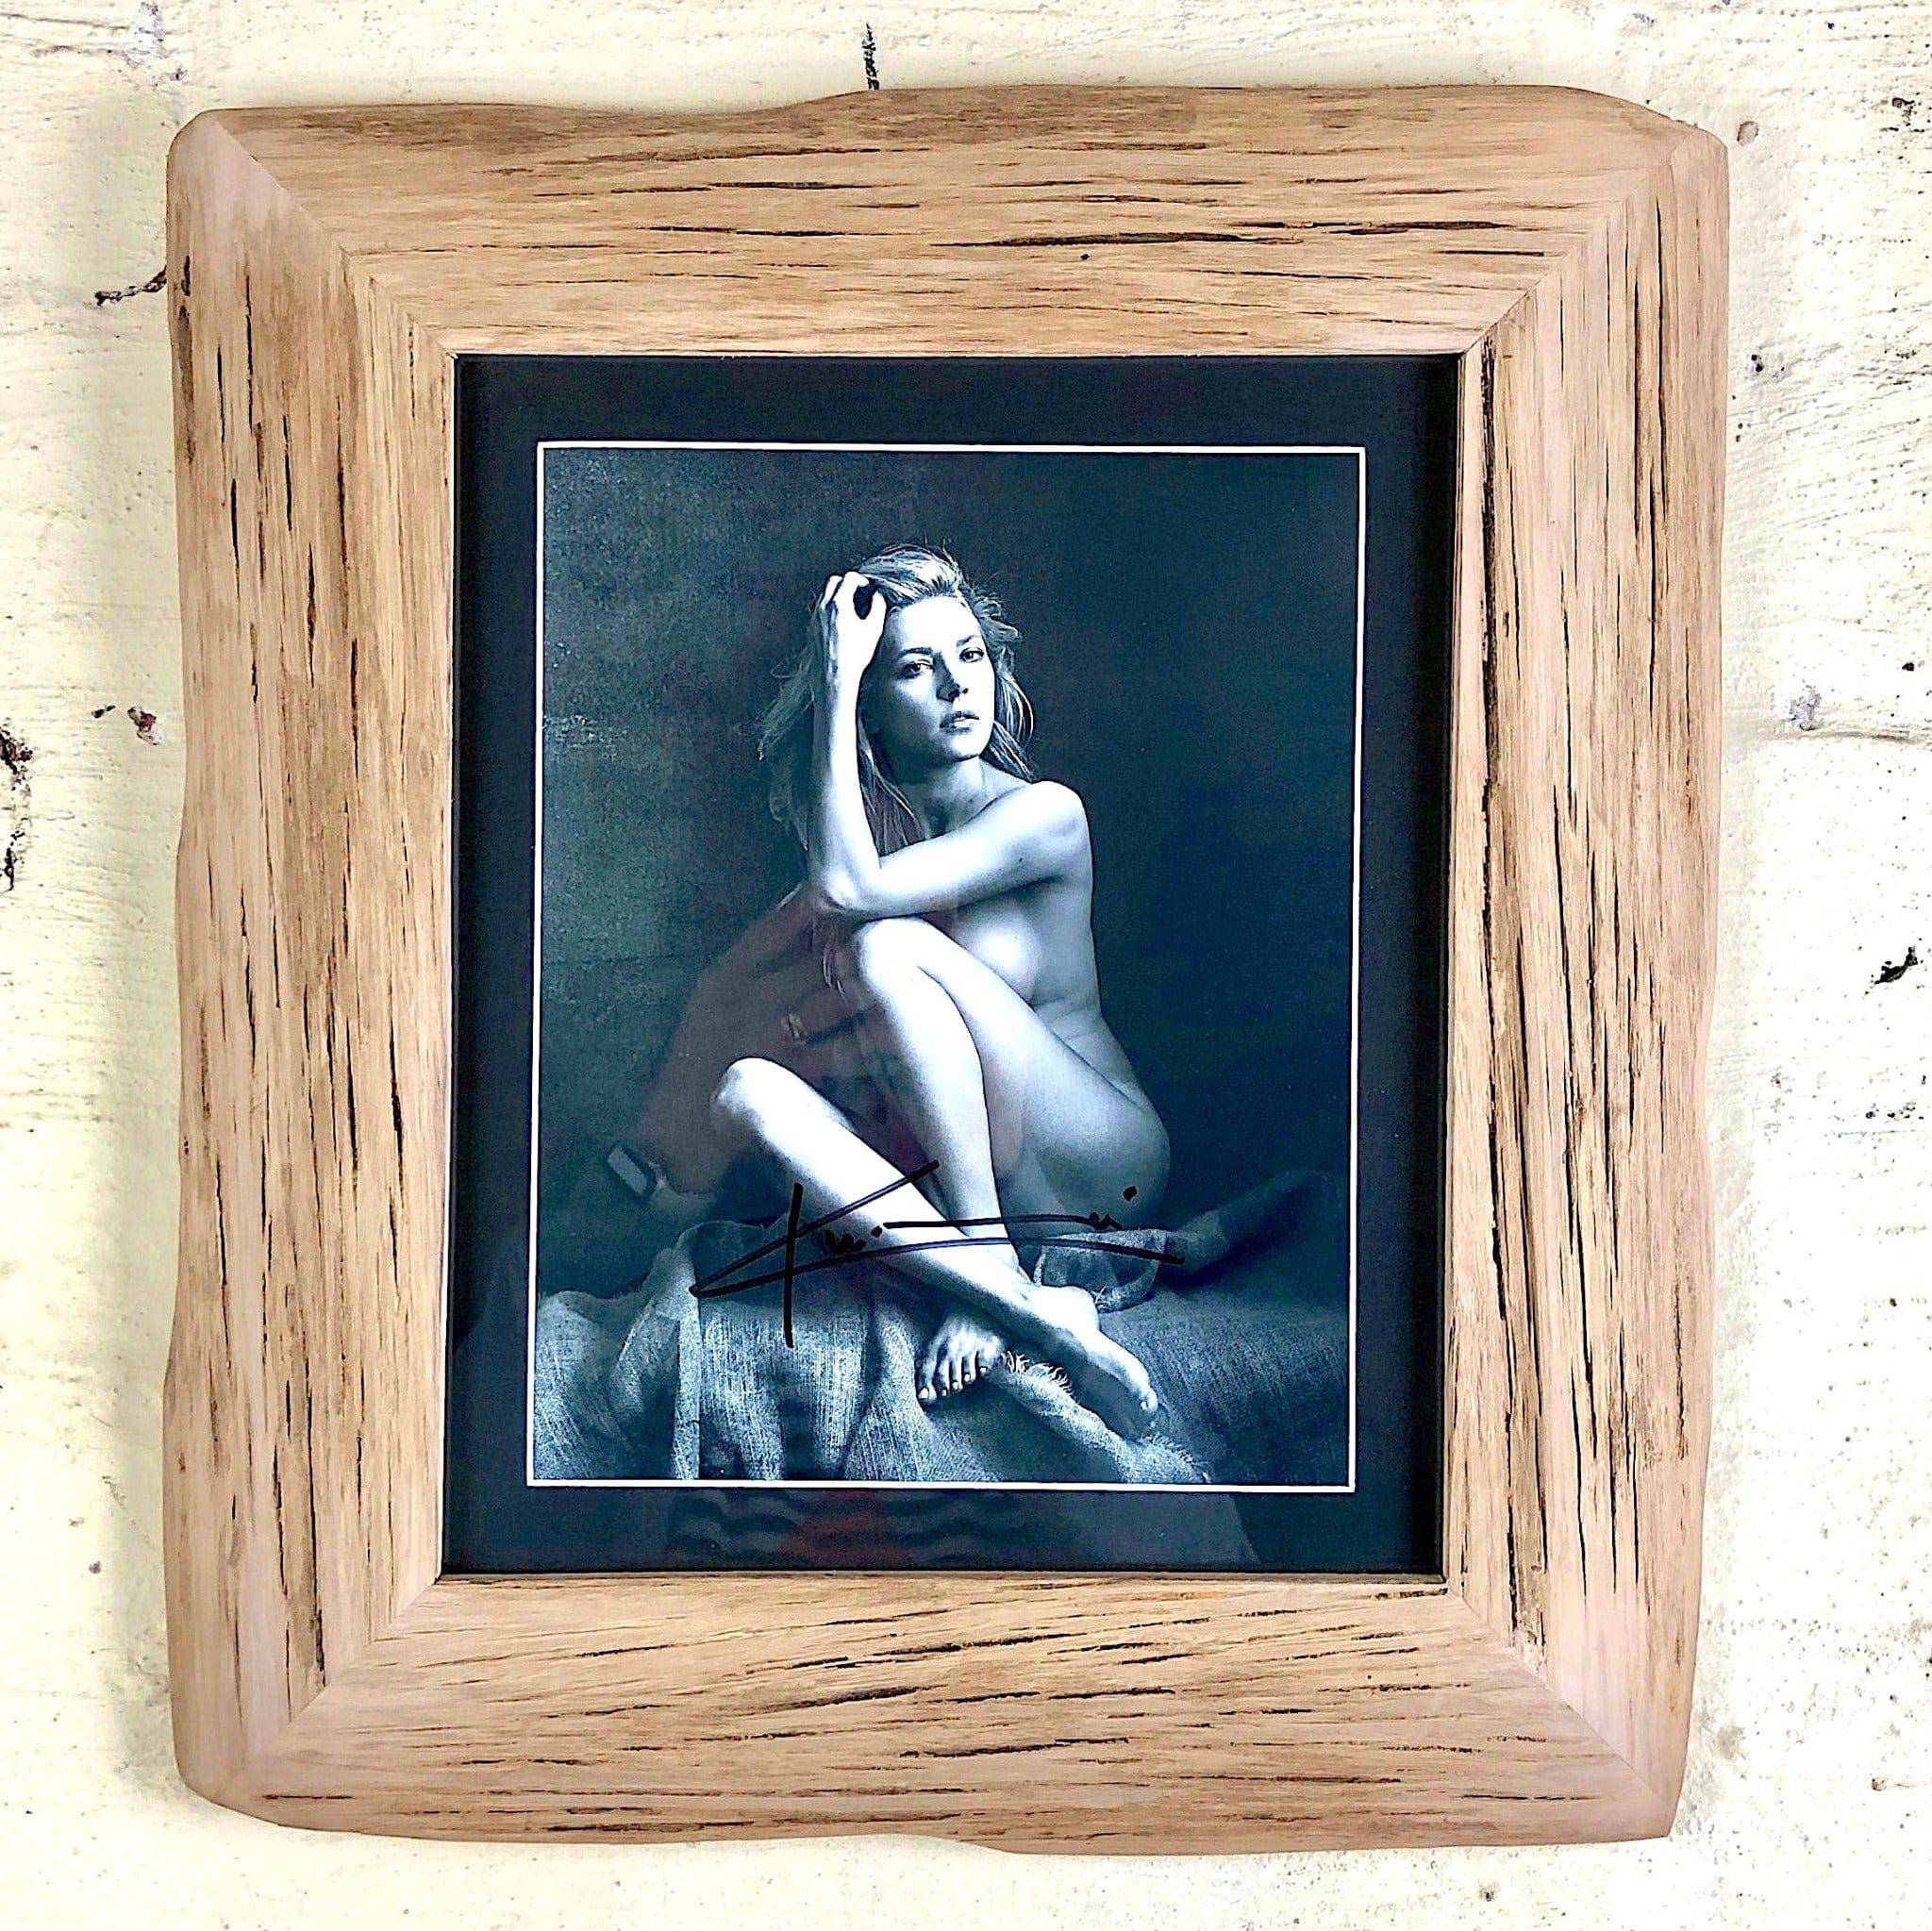 DRIFTWOOD NATURAL RECYCLED TIMBER PICTURE FRAME, HAND MADE IN AUSTRALIA